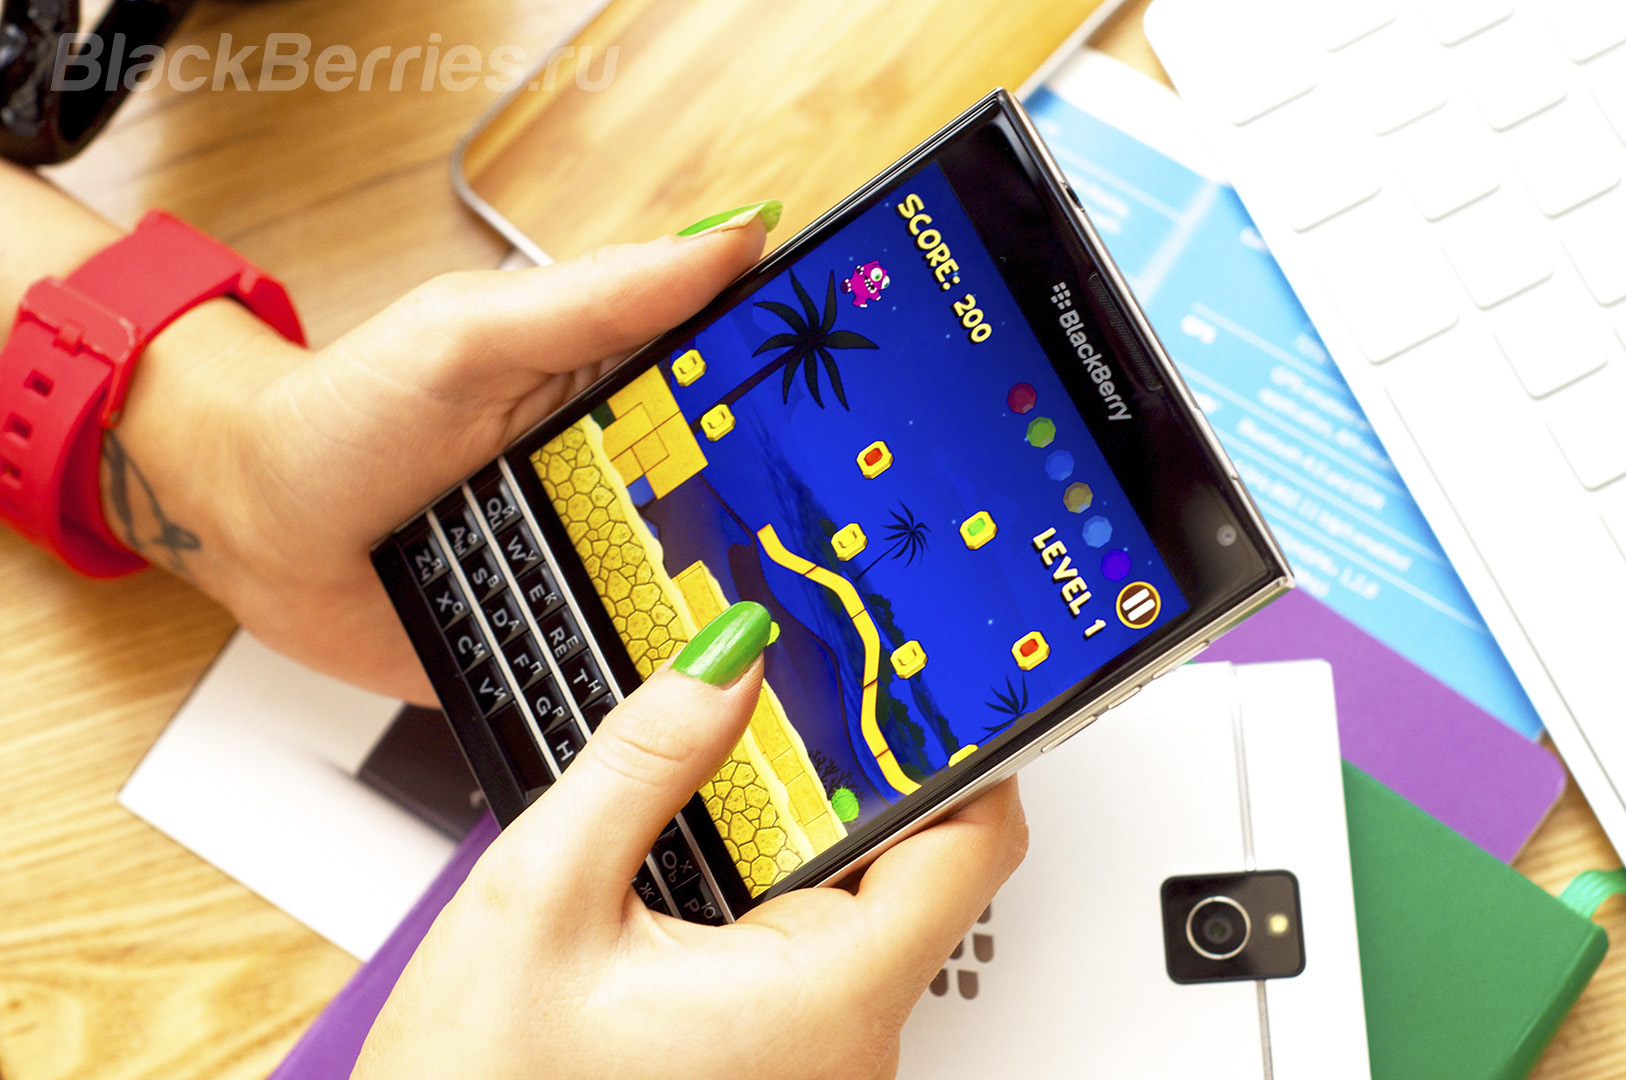 BlackBerry-Apps-Review-9-11-7